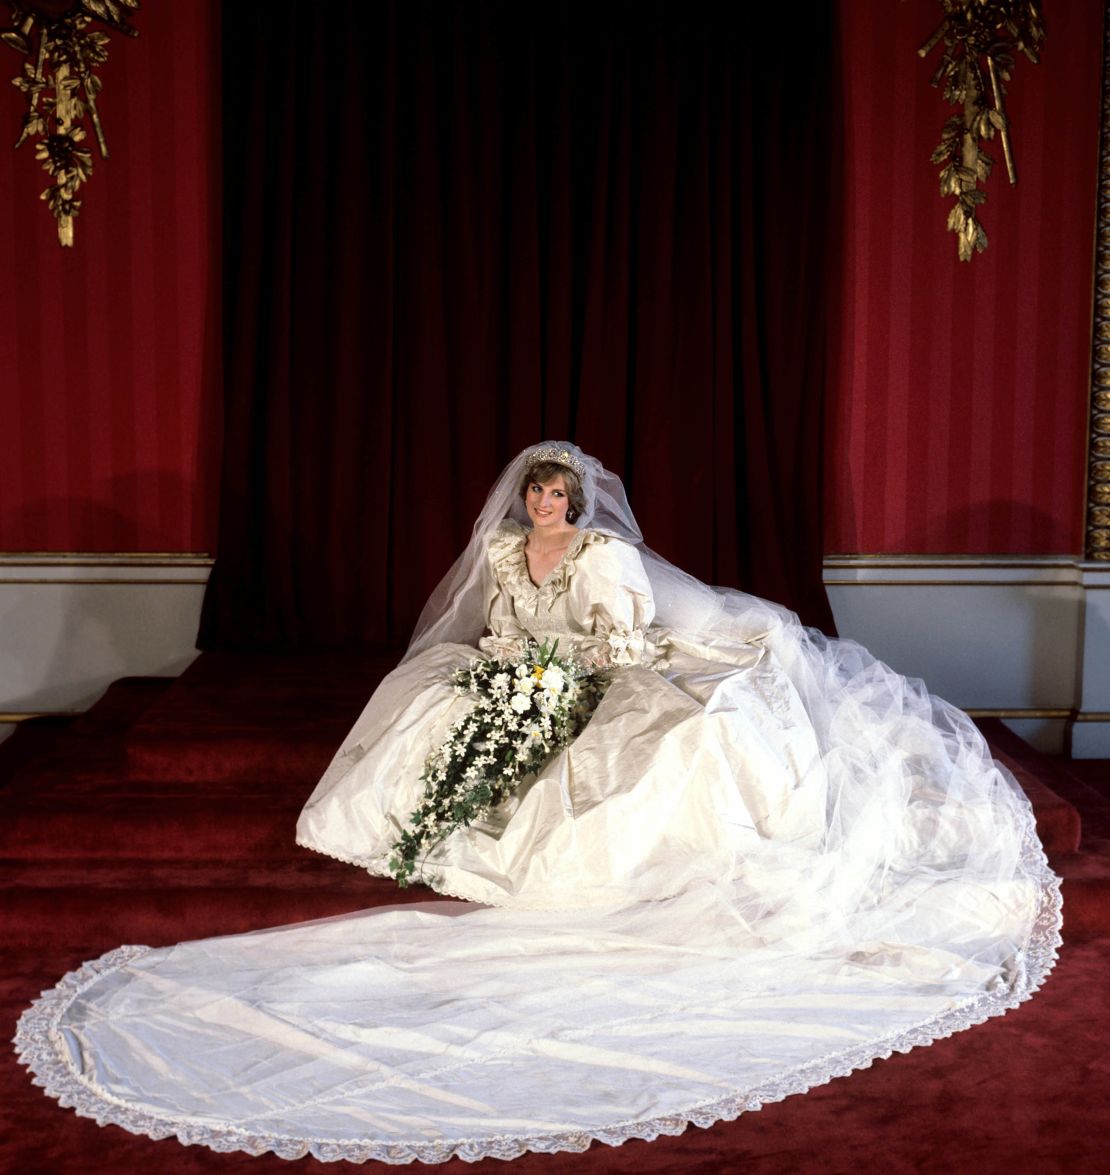 File photo dated 29/07/81 of the Princess of Wales seated in her bridal gown at Buckingham Palace after her marriage to Prince Charles at St. Paul's Cathedral.